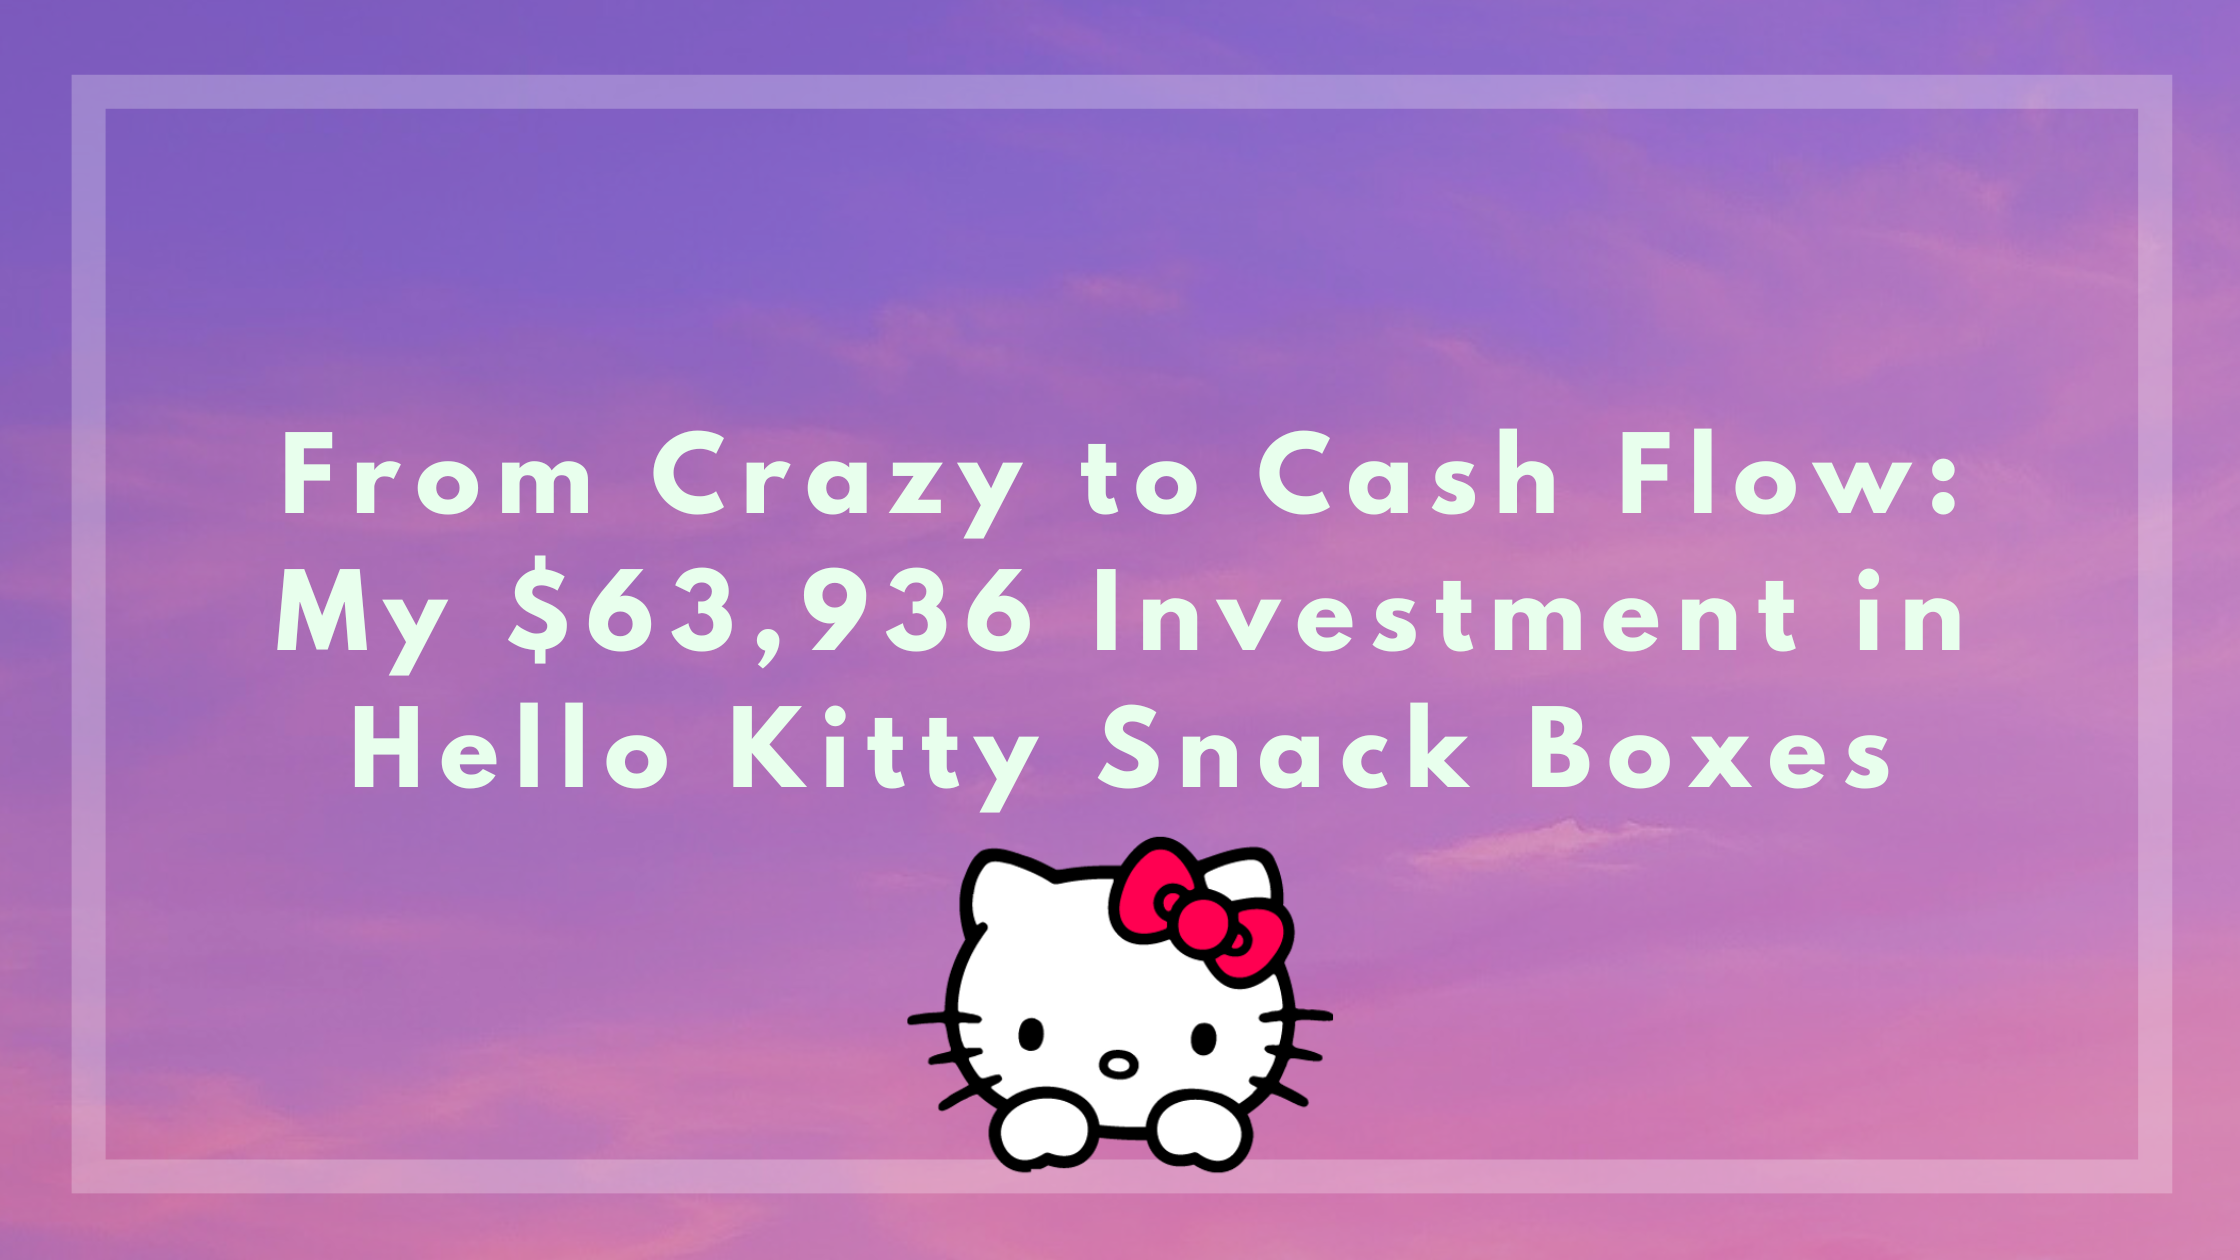 From Crazy to Cash Flow: My $63,936 Investment in Hello Kitty Snack Boxes